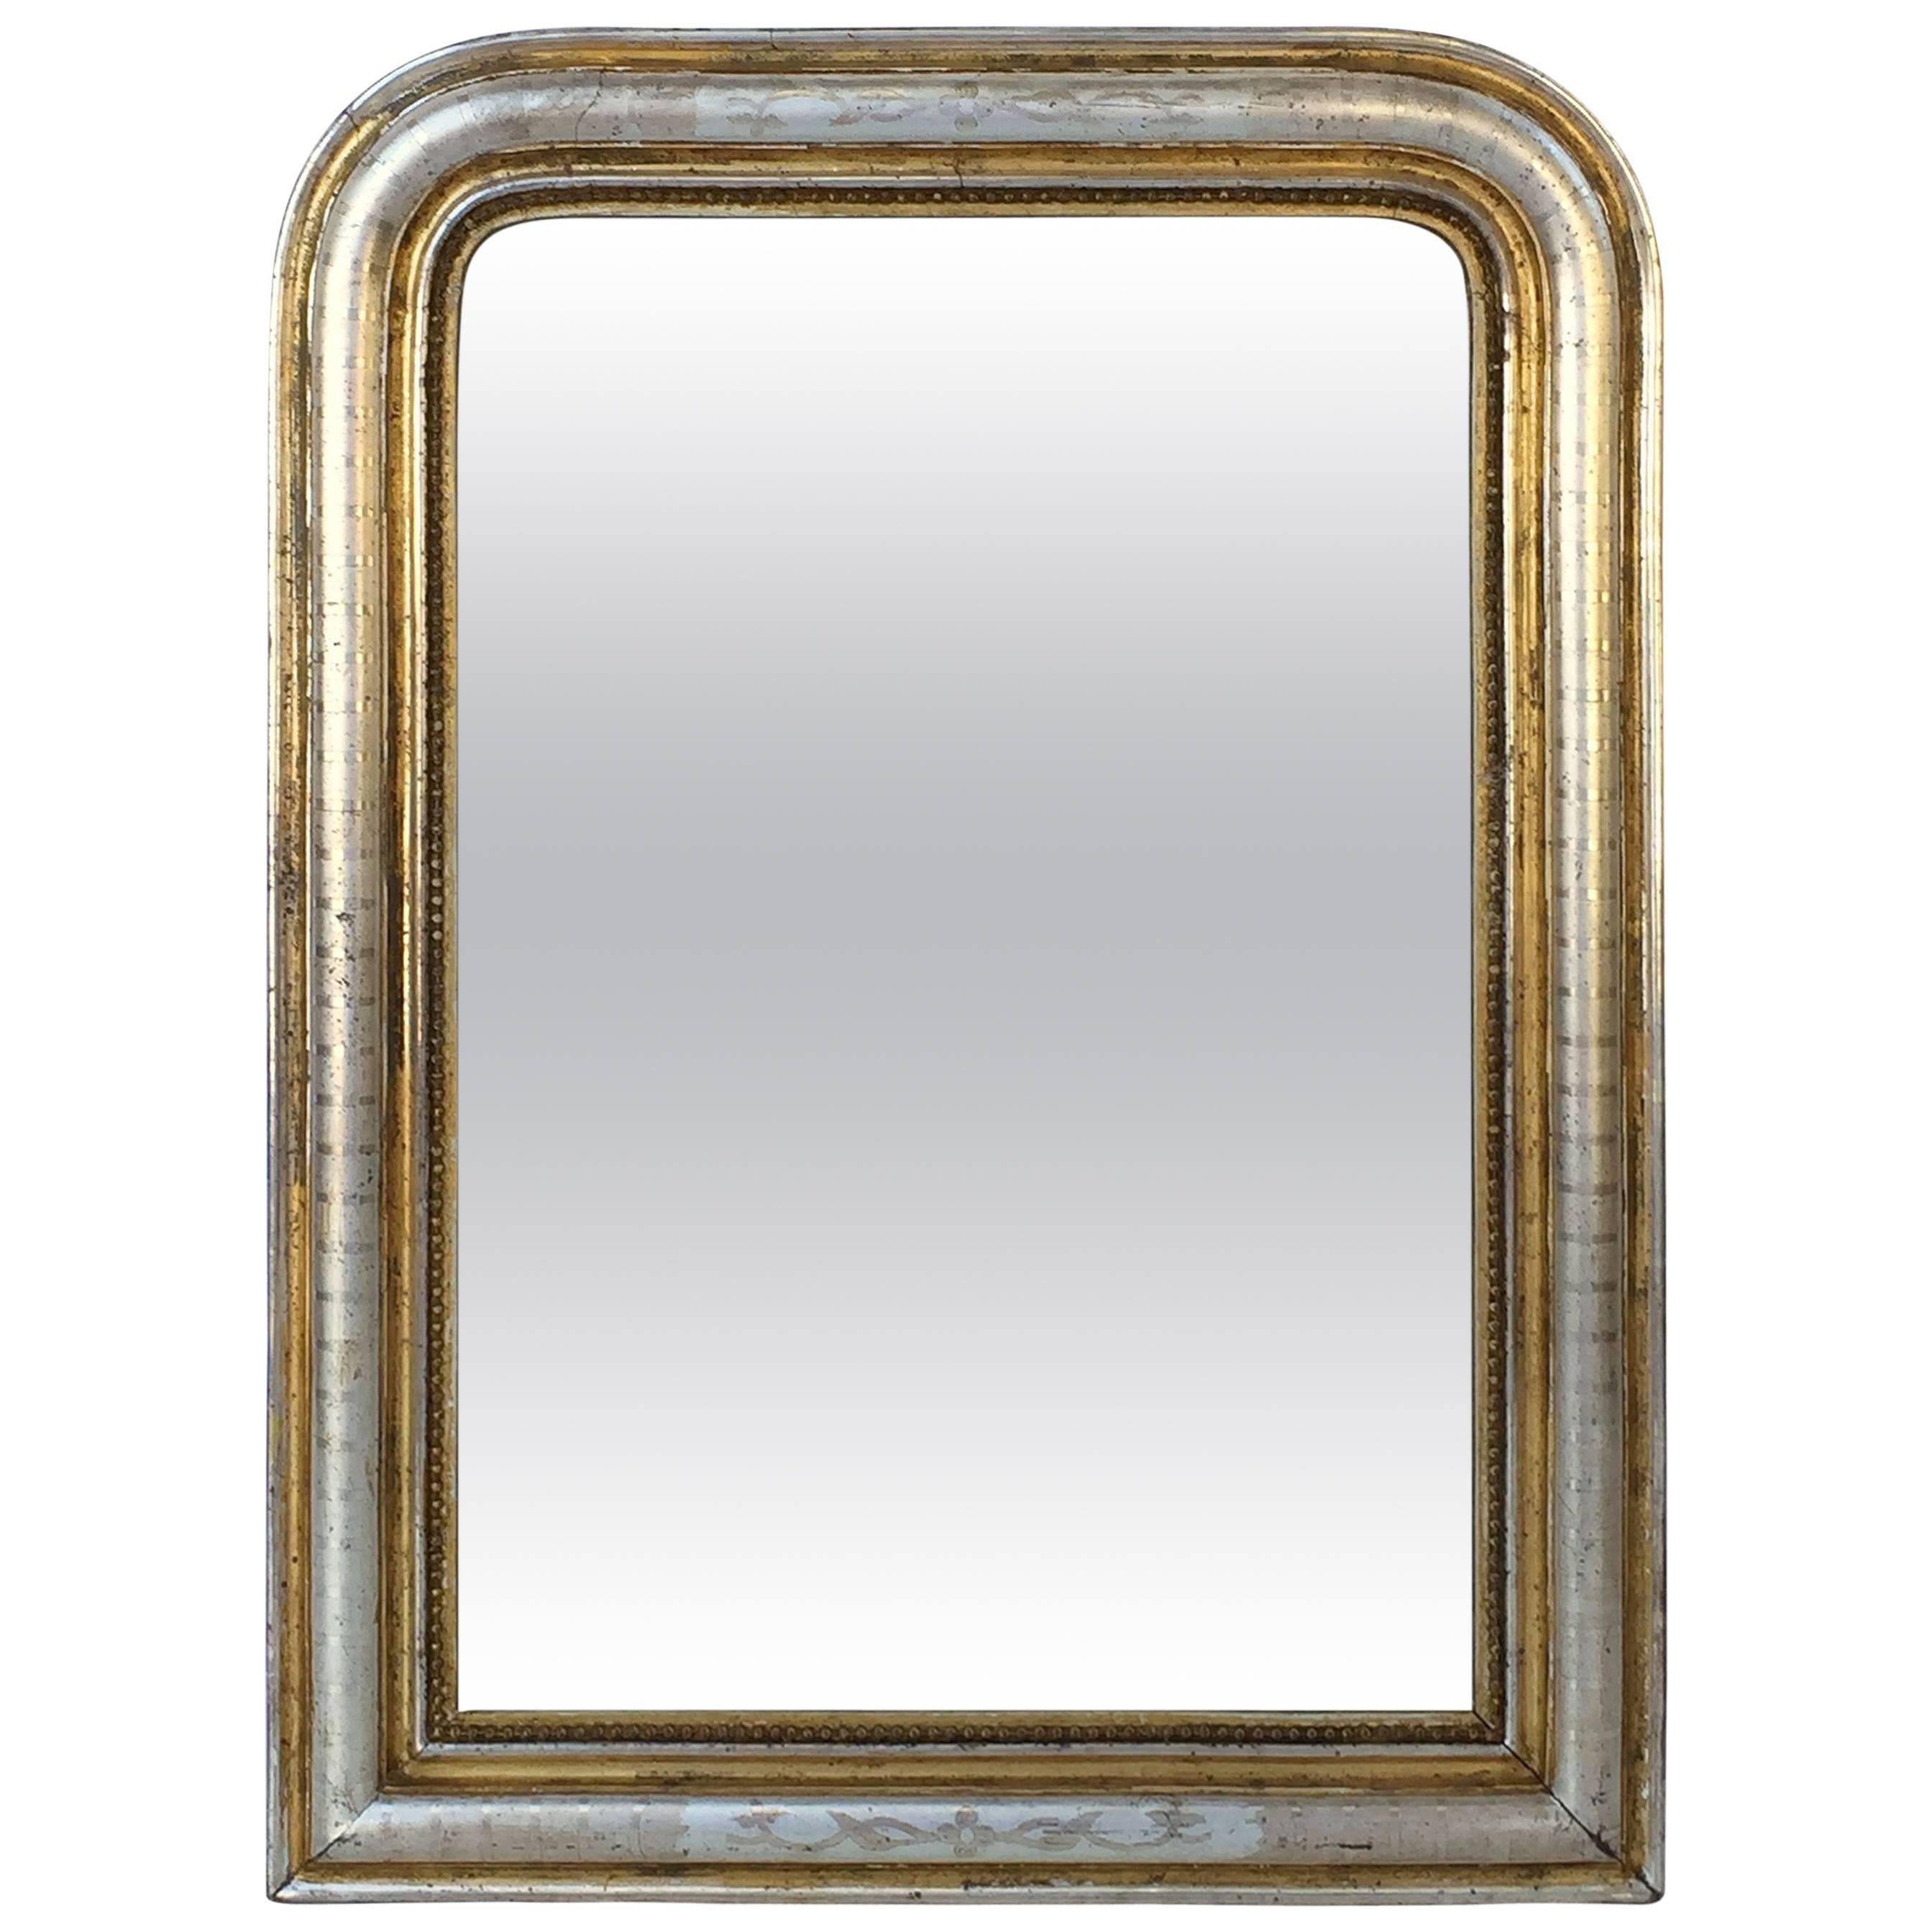 Large Louis Philippe Silver and Gold Banded Mirror (H 34 1/4" x W 27 5/8")